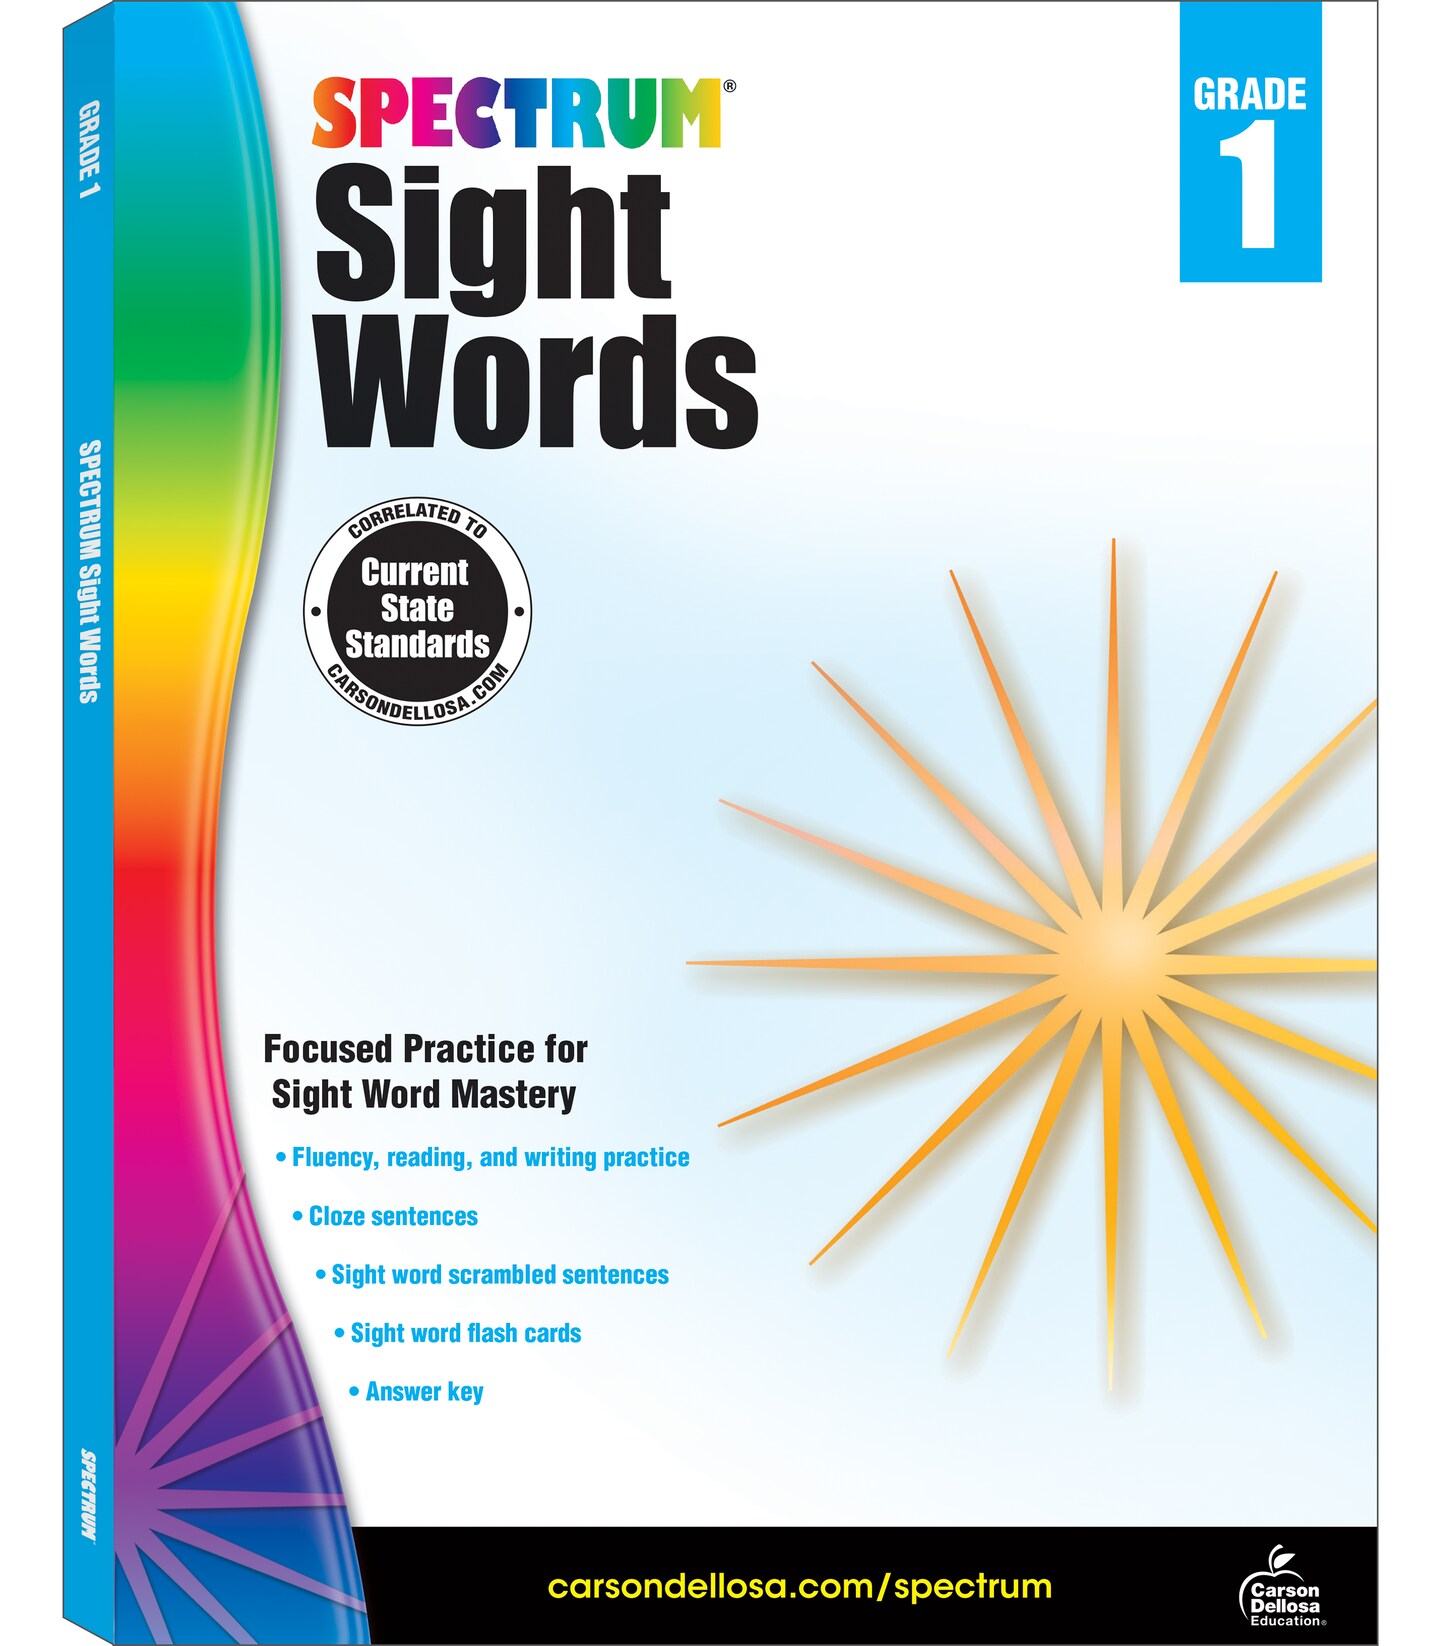 Spectrum 1st Grade Sight Words Workbook, Ages 6 to 7, Grade 1 Sight Words, Dictionary Skills, Vocabulary Builder, Synonyms and Antonyms, Prefixes and Suffixes - 160 Pages